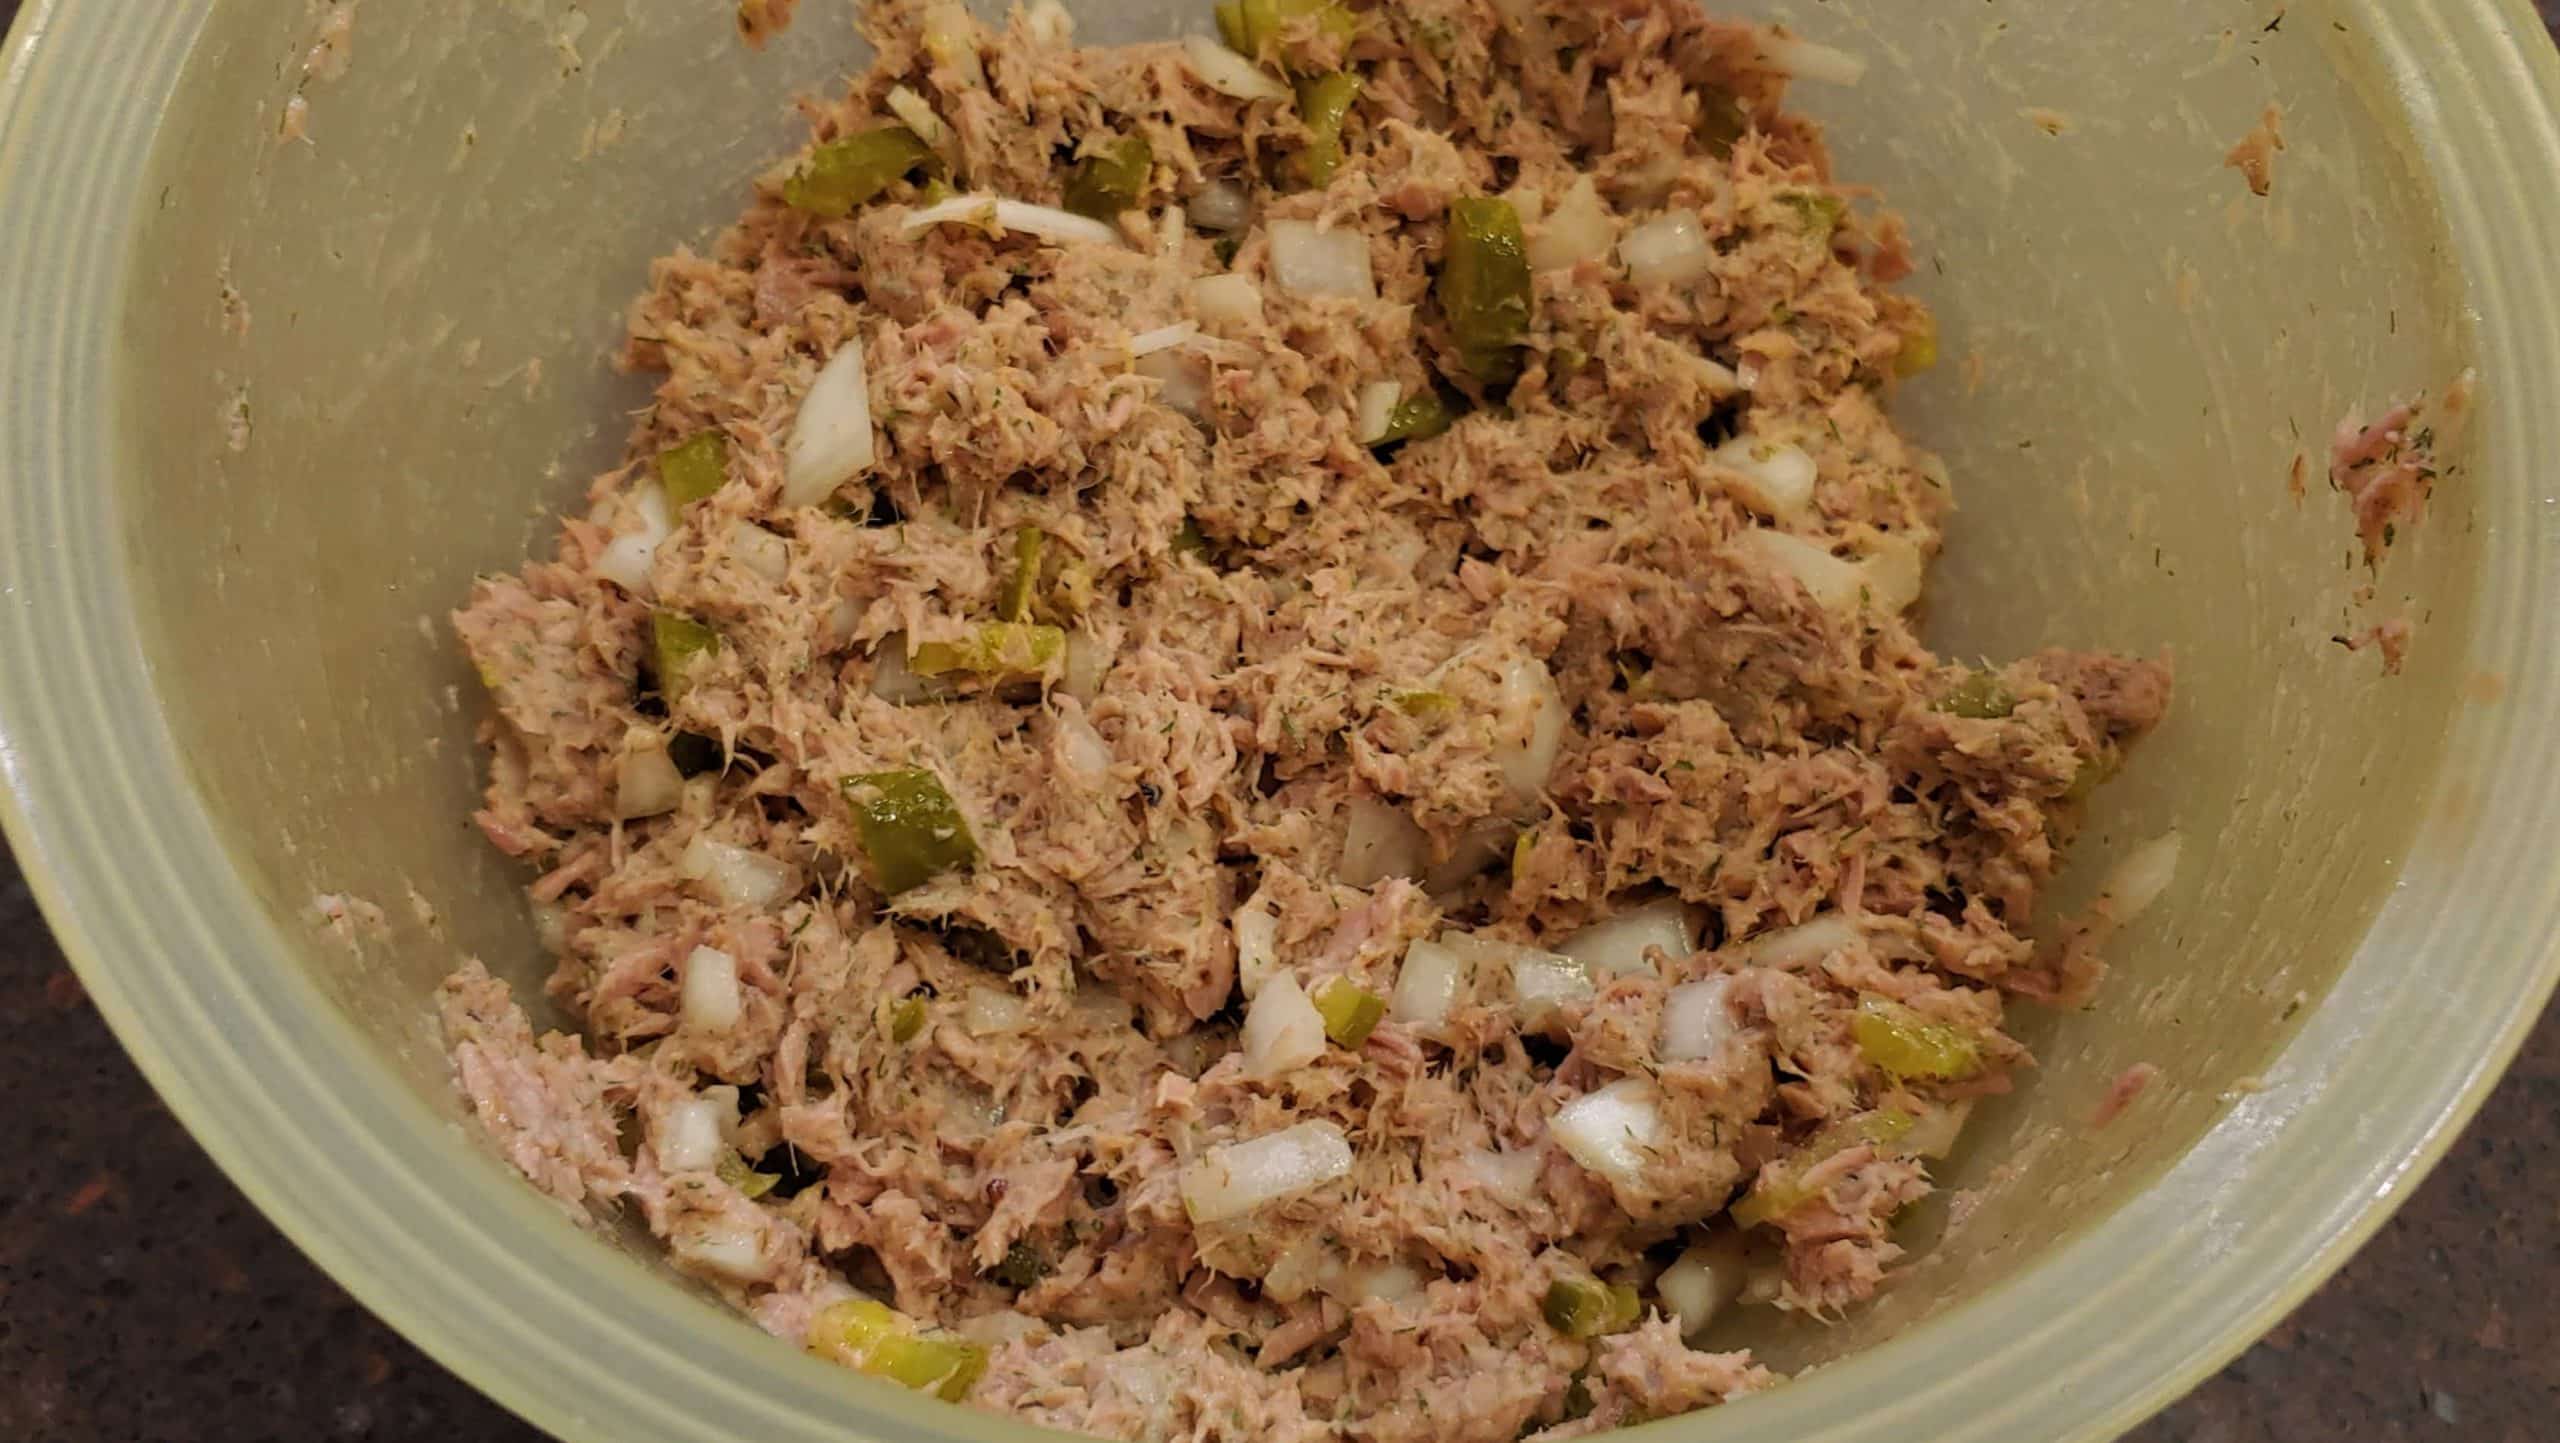 Tuna salad with romaine lettuce - Dining in with Danielle